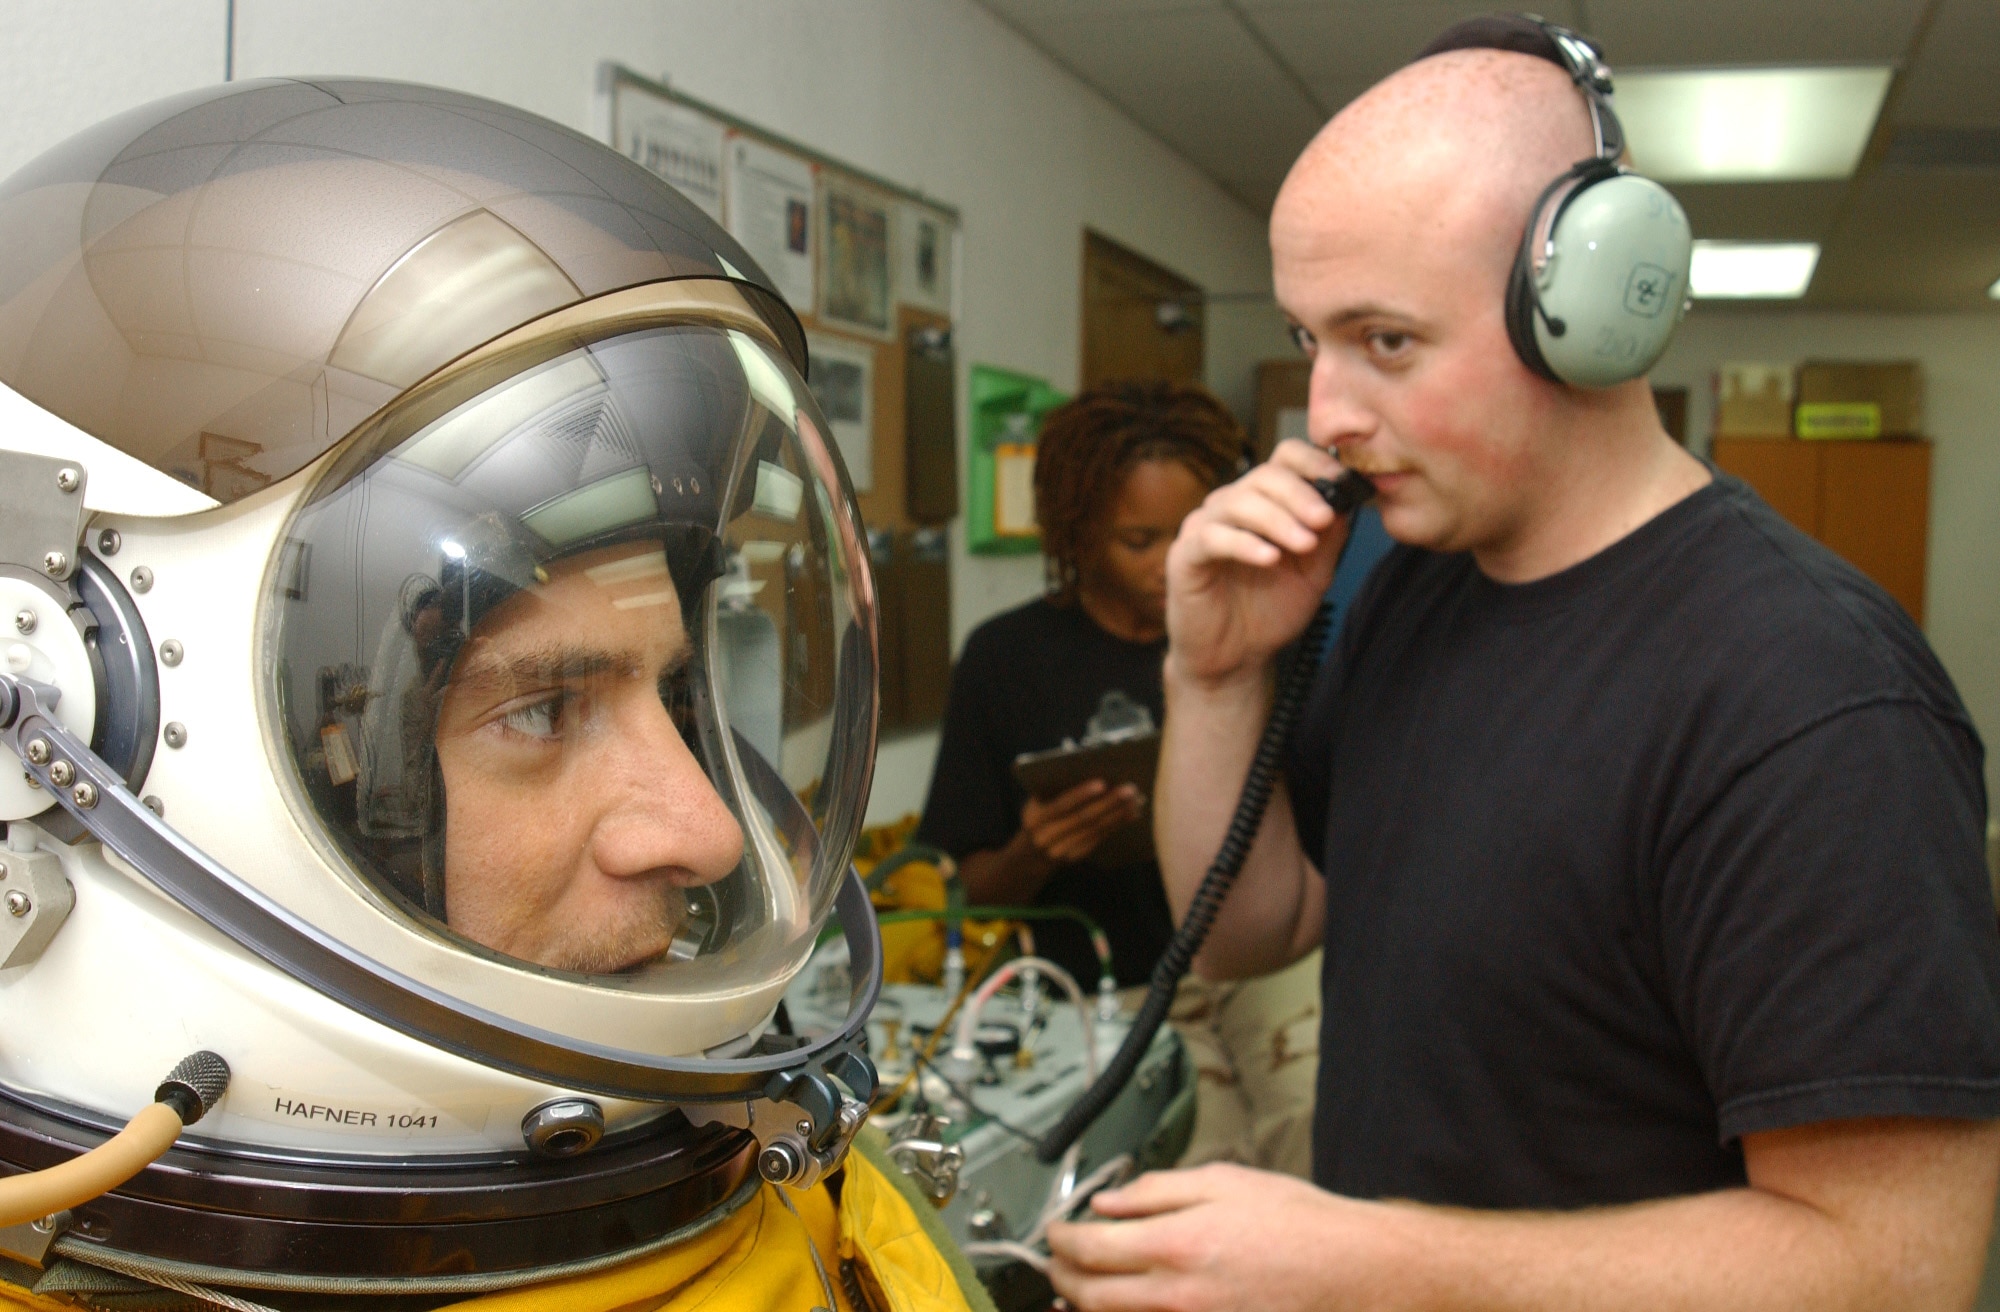 Capt. Greg Hafner listens as Senior Airman Shawn Nyer begins pressurization of his flight suit while Senior Airman Nakia Newton works in the background. The captain breathed nearly pure oxygen for almost 35 minutes before taking off on a U-2 mission. Captain Hafner is a U-2 pilot and Airman Nyer is a physiological support specialist assigned to the 99th Expeditionary Reconnaissance Squadron. (U.S. Air Force photo/Master Sgt. Jason Tudor)